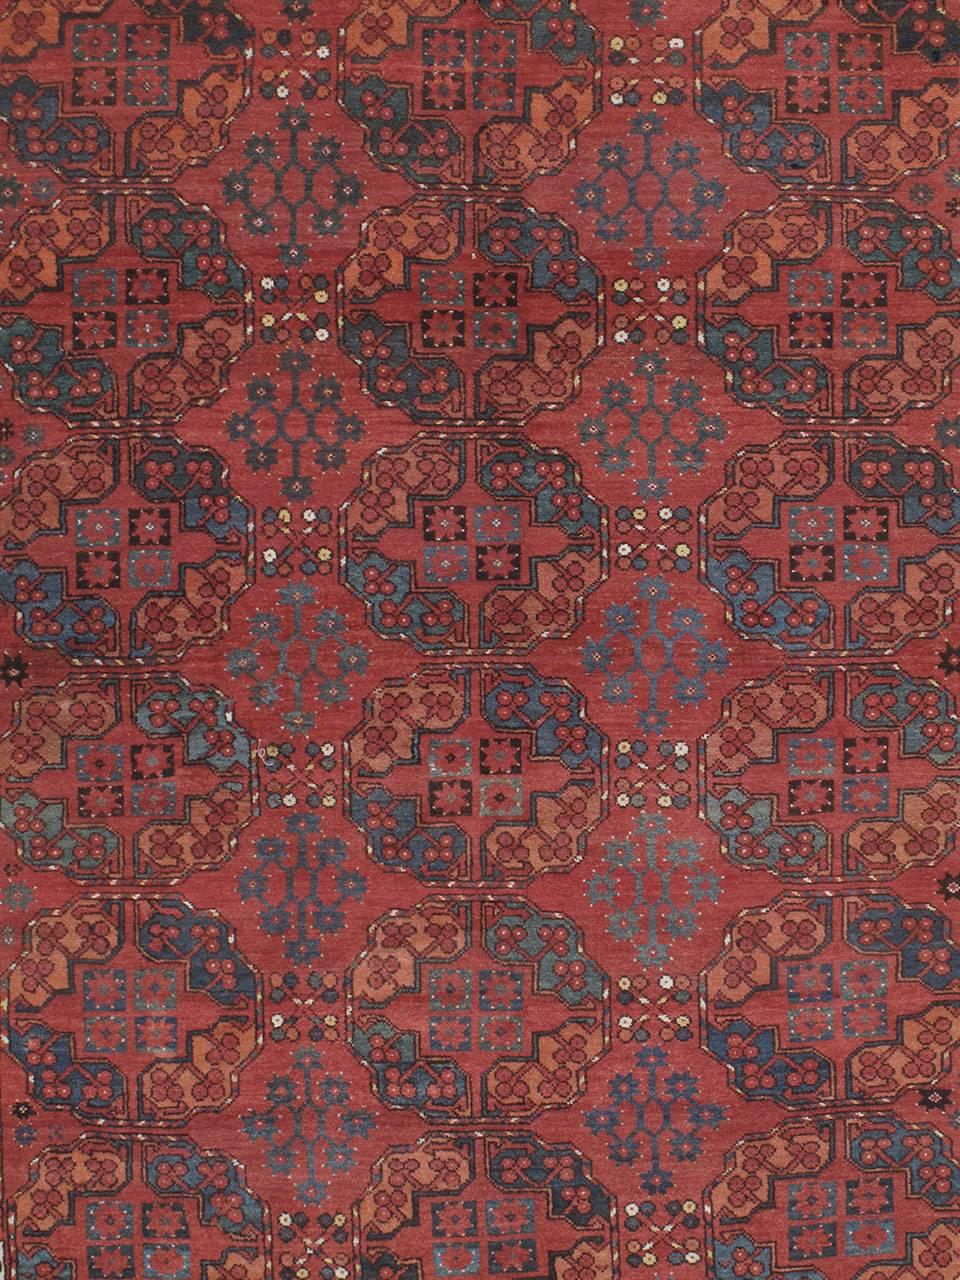 Antique Ersari Main carpet or rug. An antique tribal carpet from Central Asia attributed to the Ersari Turkmen. Deeply saturated colors, dominated by rich madder reds, repetitive heraldic symbols, called 